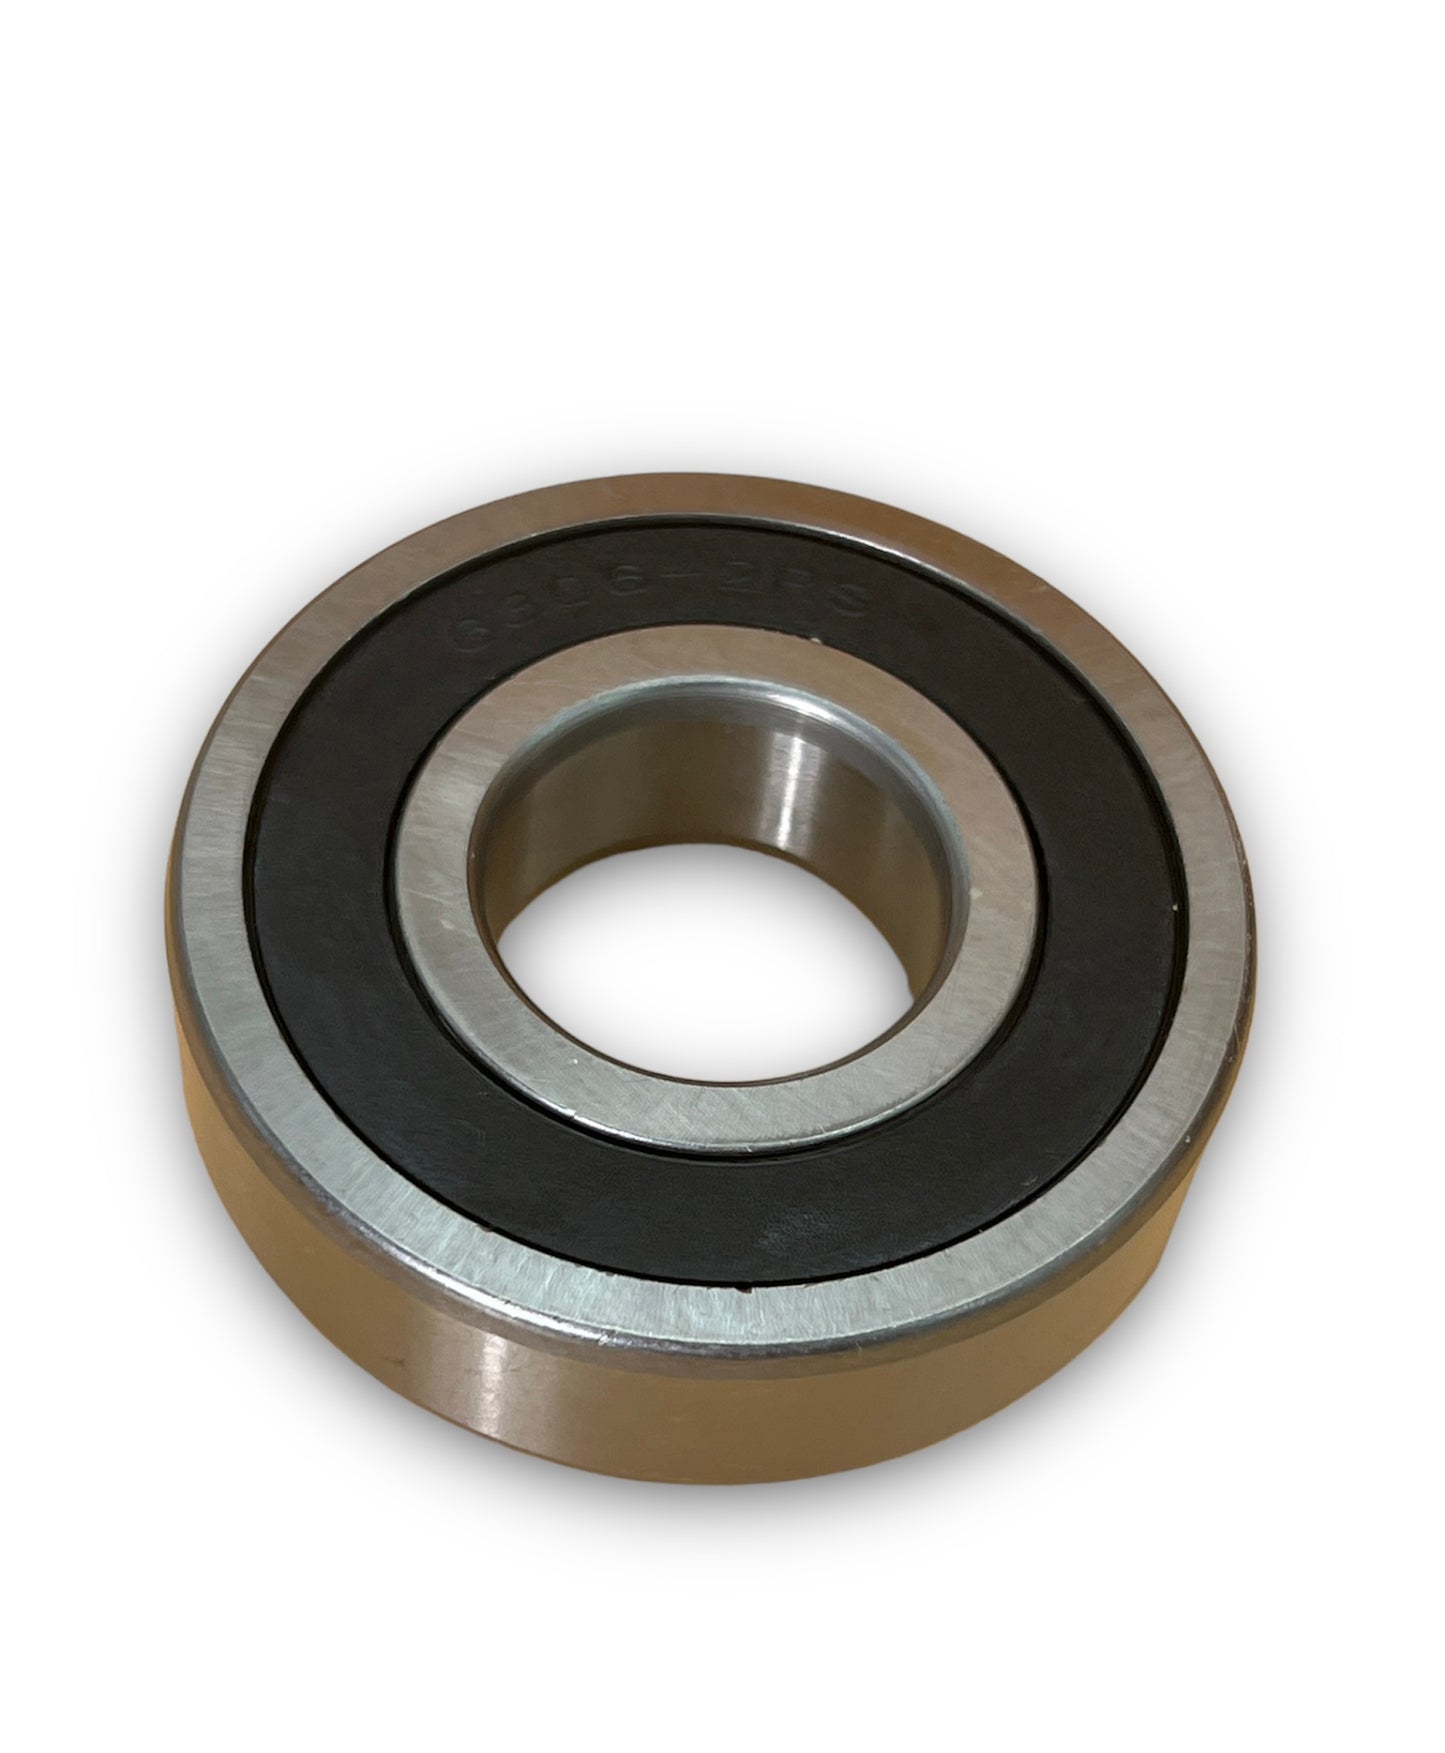 LG Washer Outer Tub Ball Bearing - MAP61913708, Replaces: 4280FR4048L 4119890 AP5977997 PS11711139 EAP11711139 PD00041546 INVERTEC